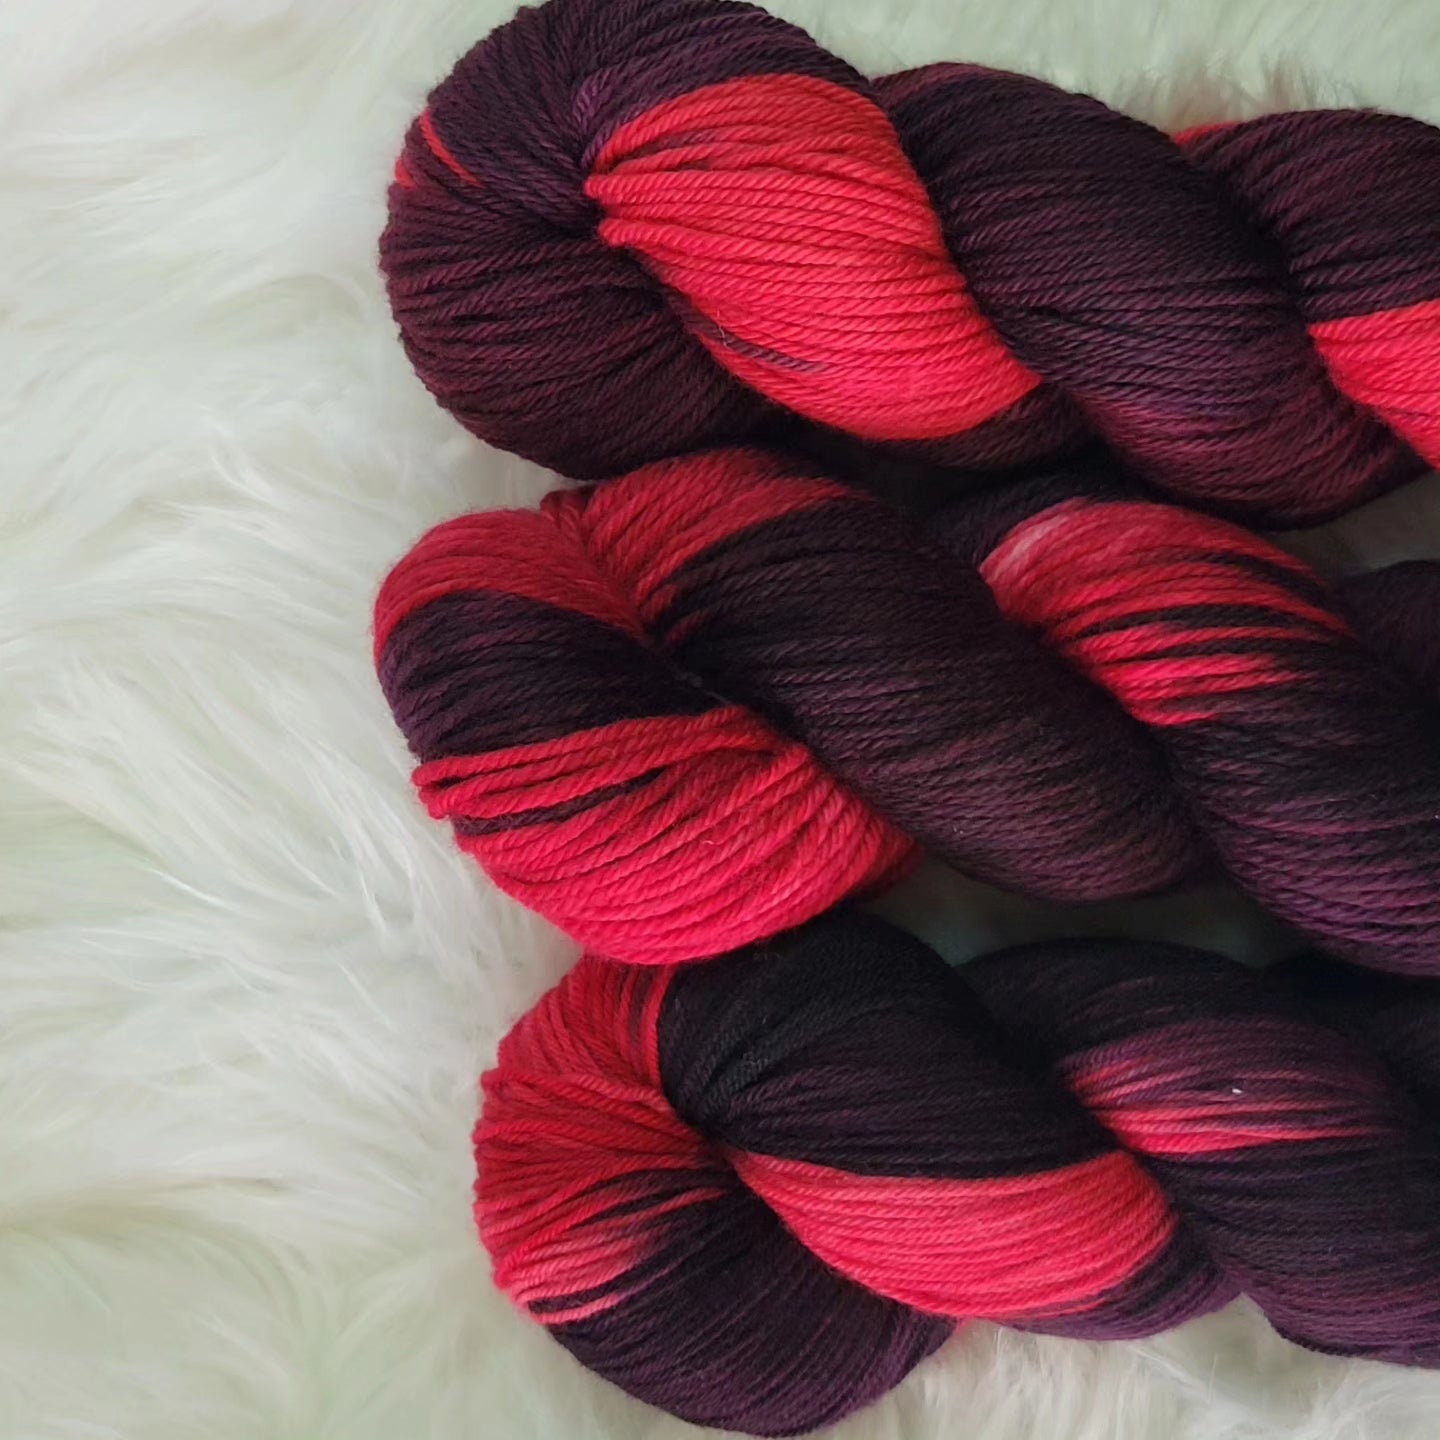 PRE-ORDER Hand Dyed Yarn - Nightmare Before Christmas Collection